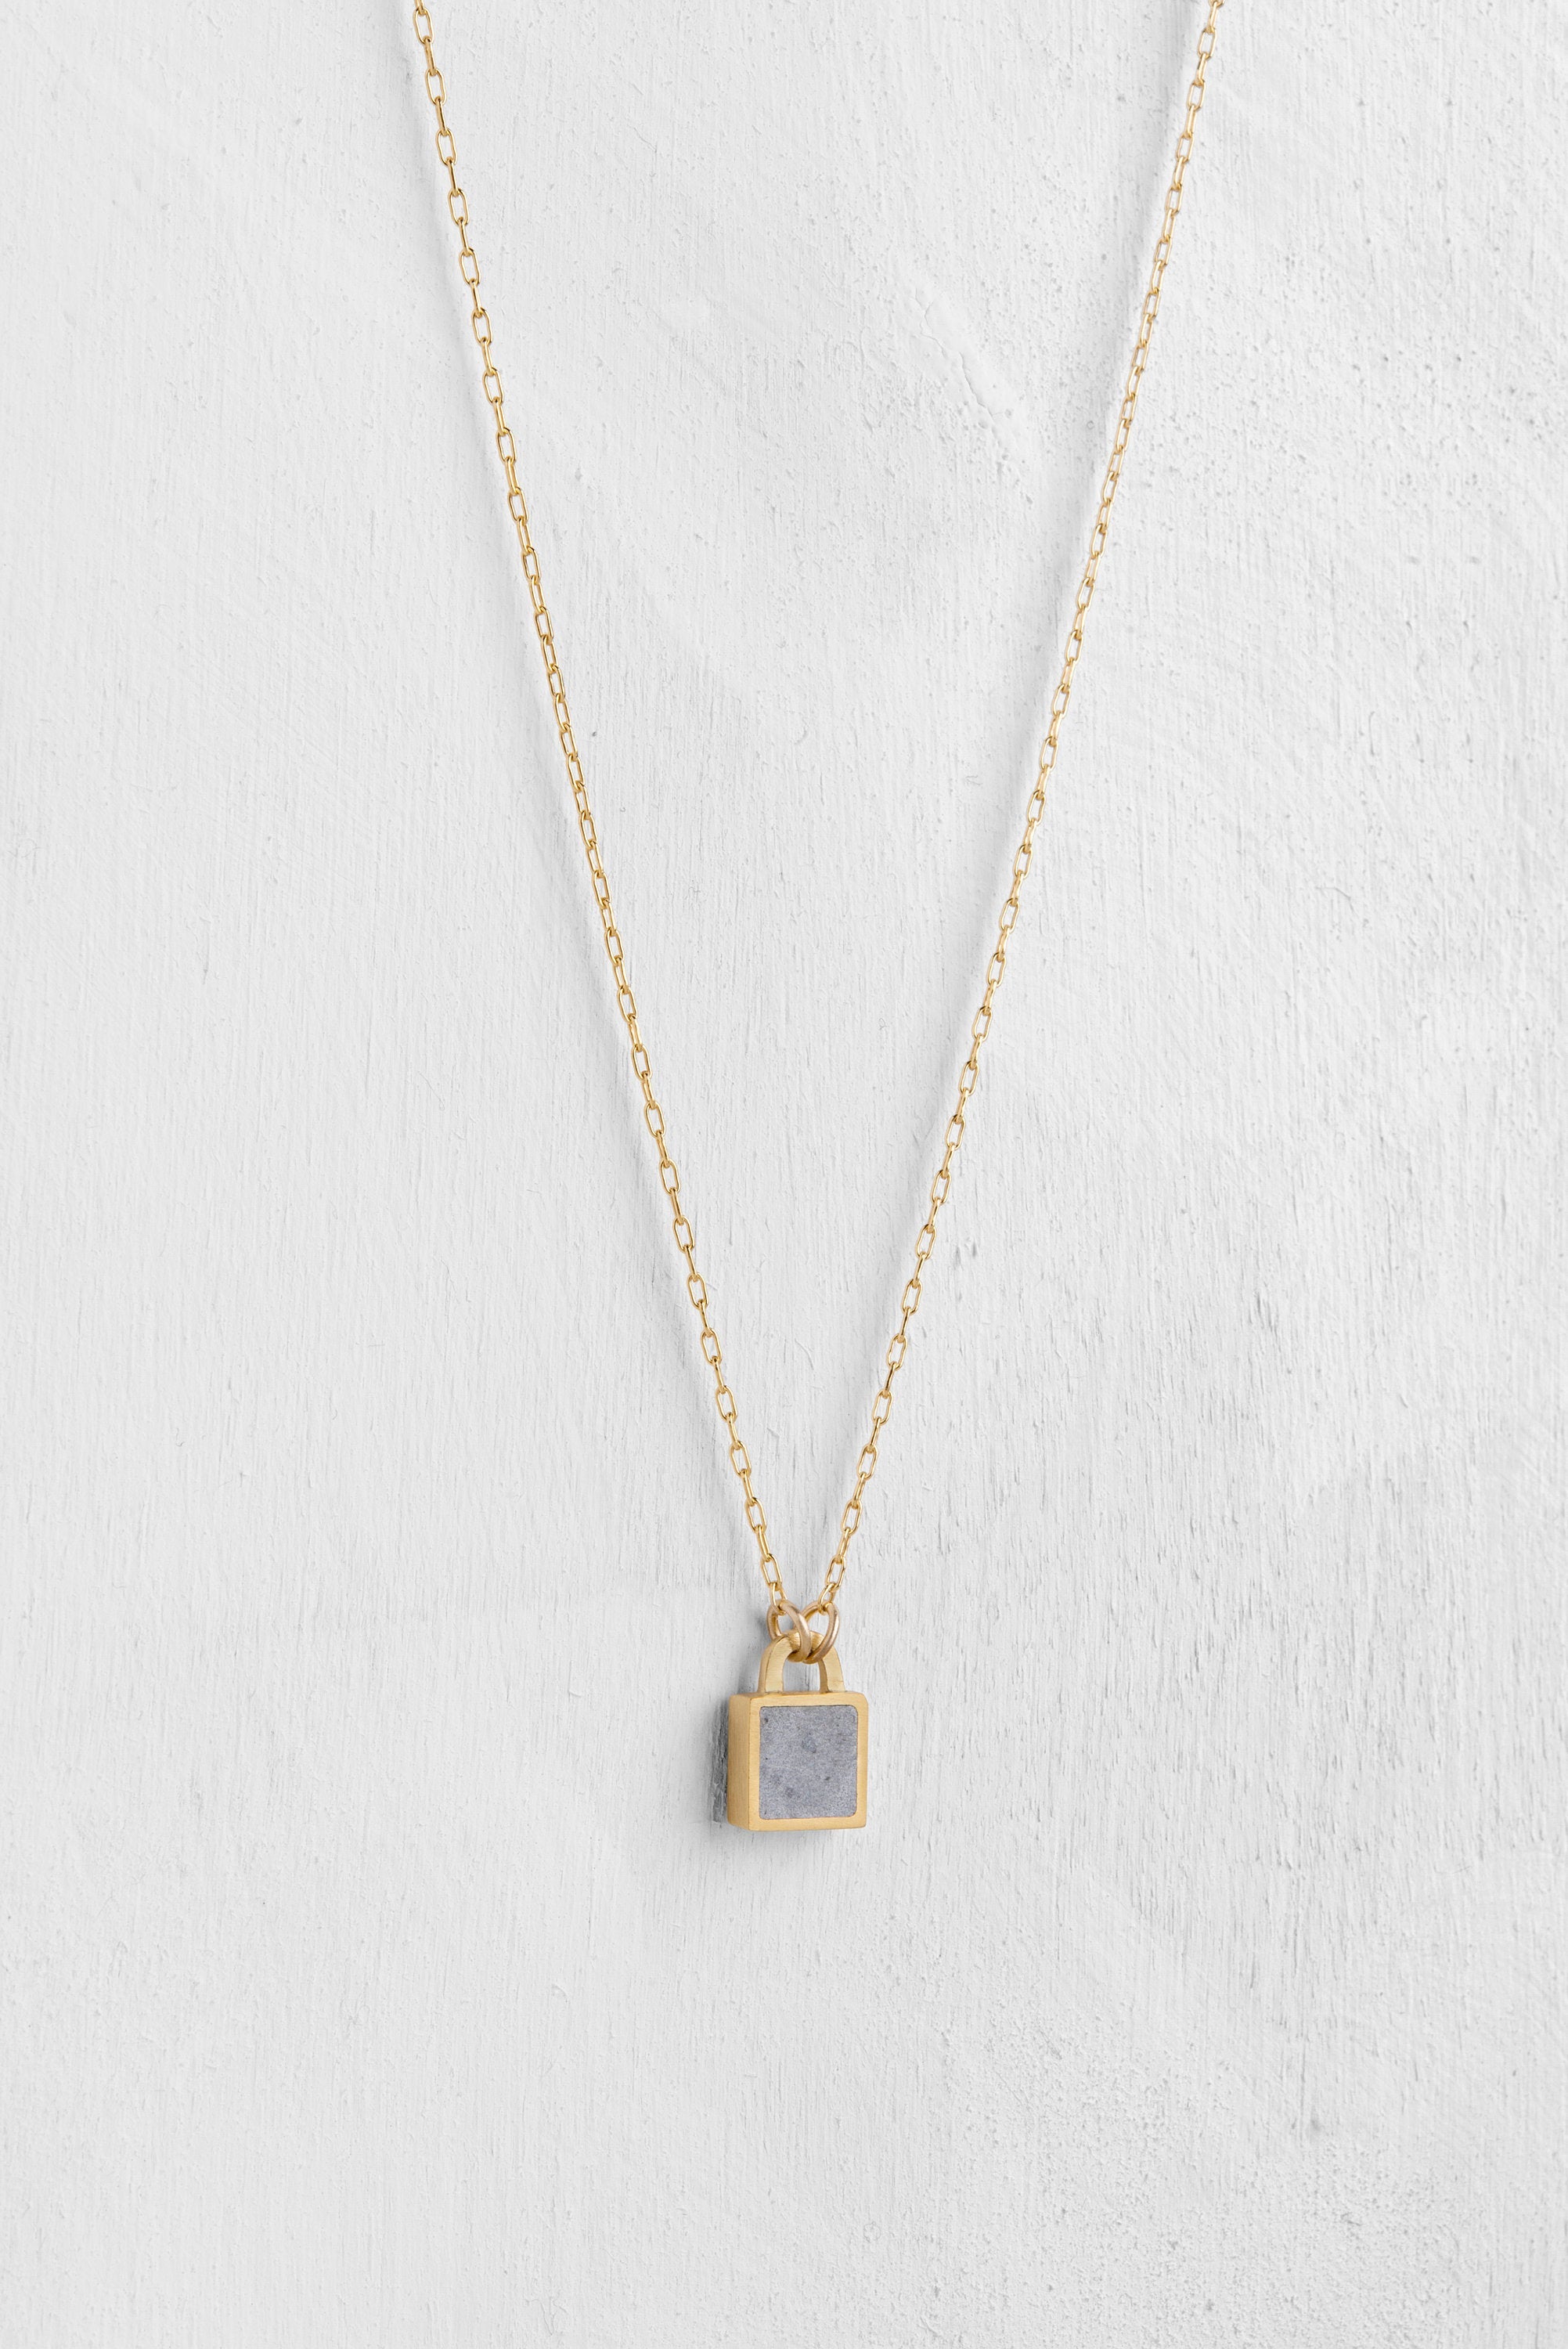 Concrete lock pendant, Concrete jewelry, Sq lock Necklace, Tiny Gold Necklace, Geometric Everyday necklace, Minimalist pendent, Gift for her - hs